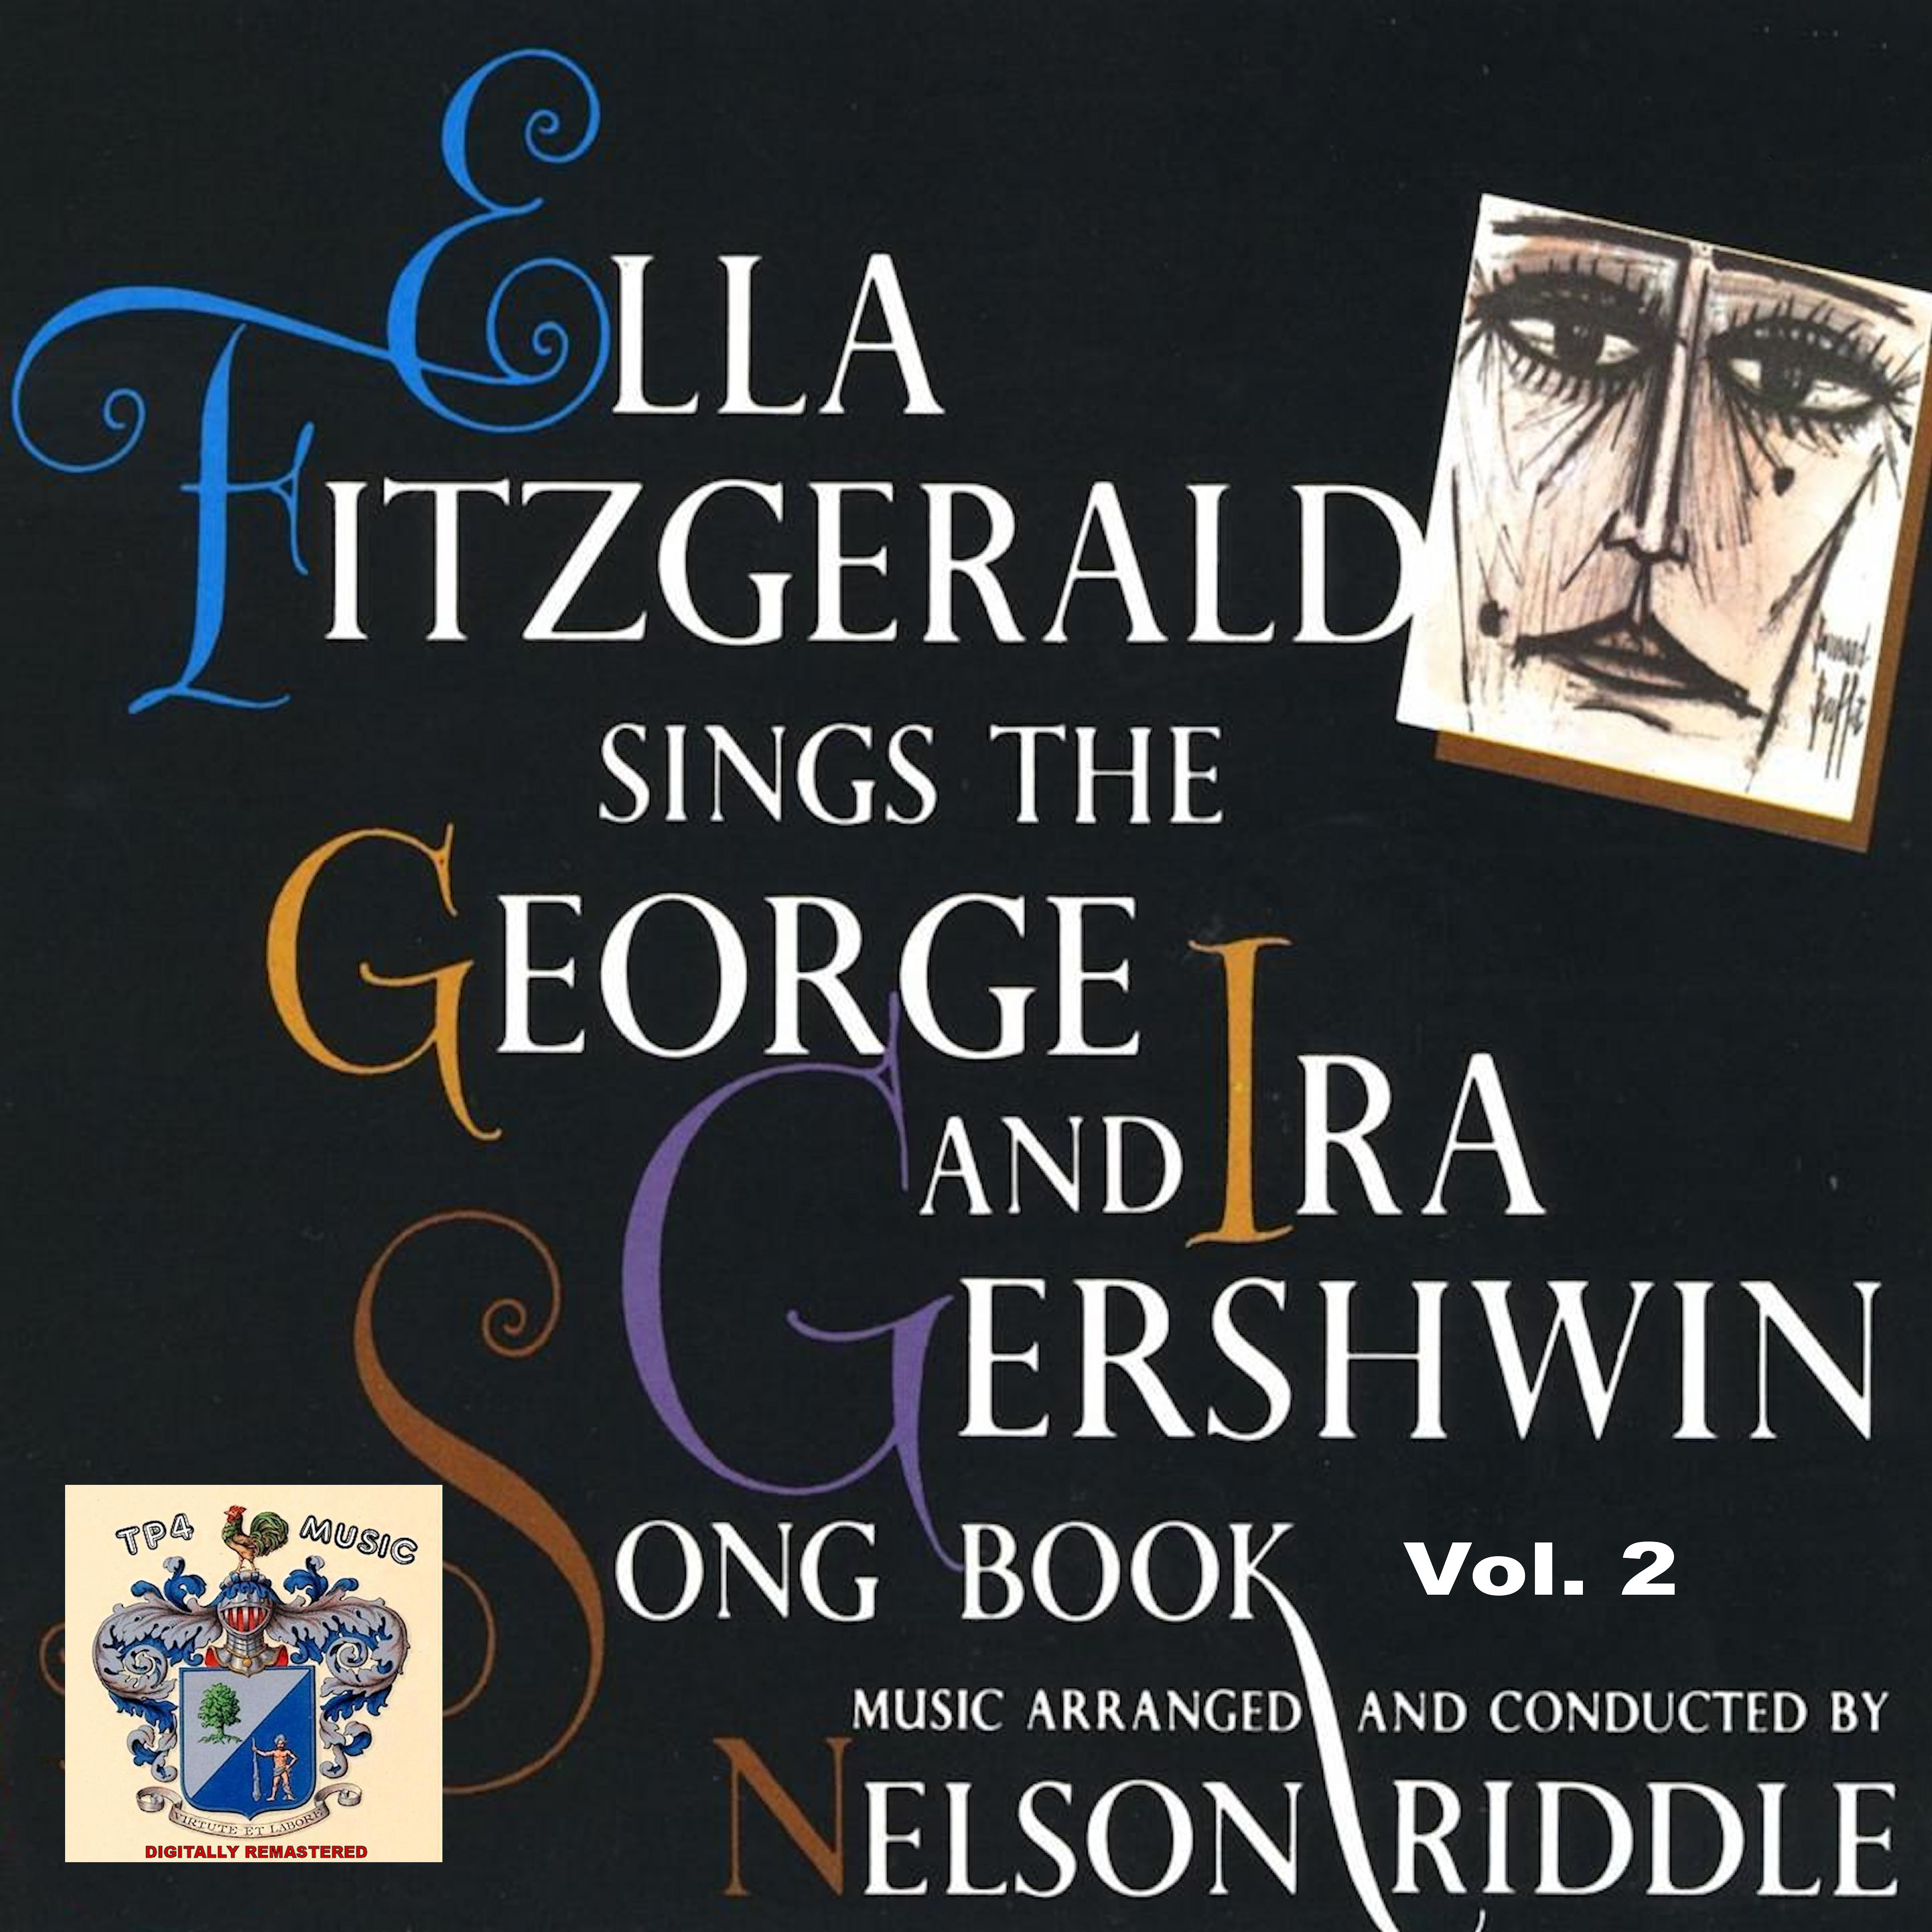 George and Ira Gershwin song Book Vol. 2